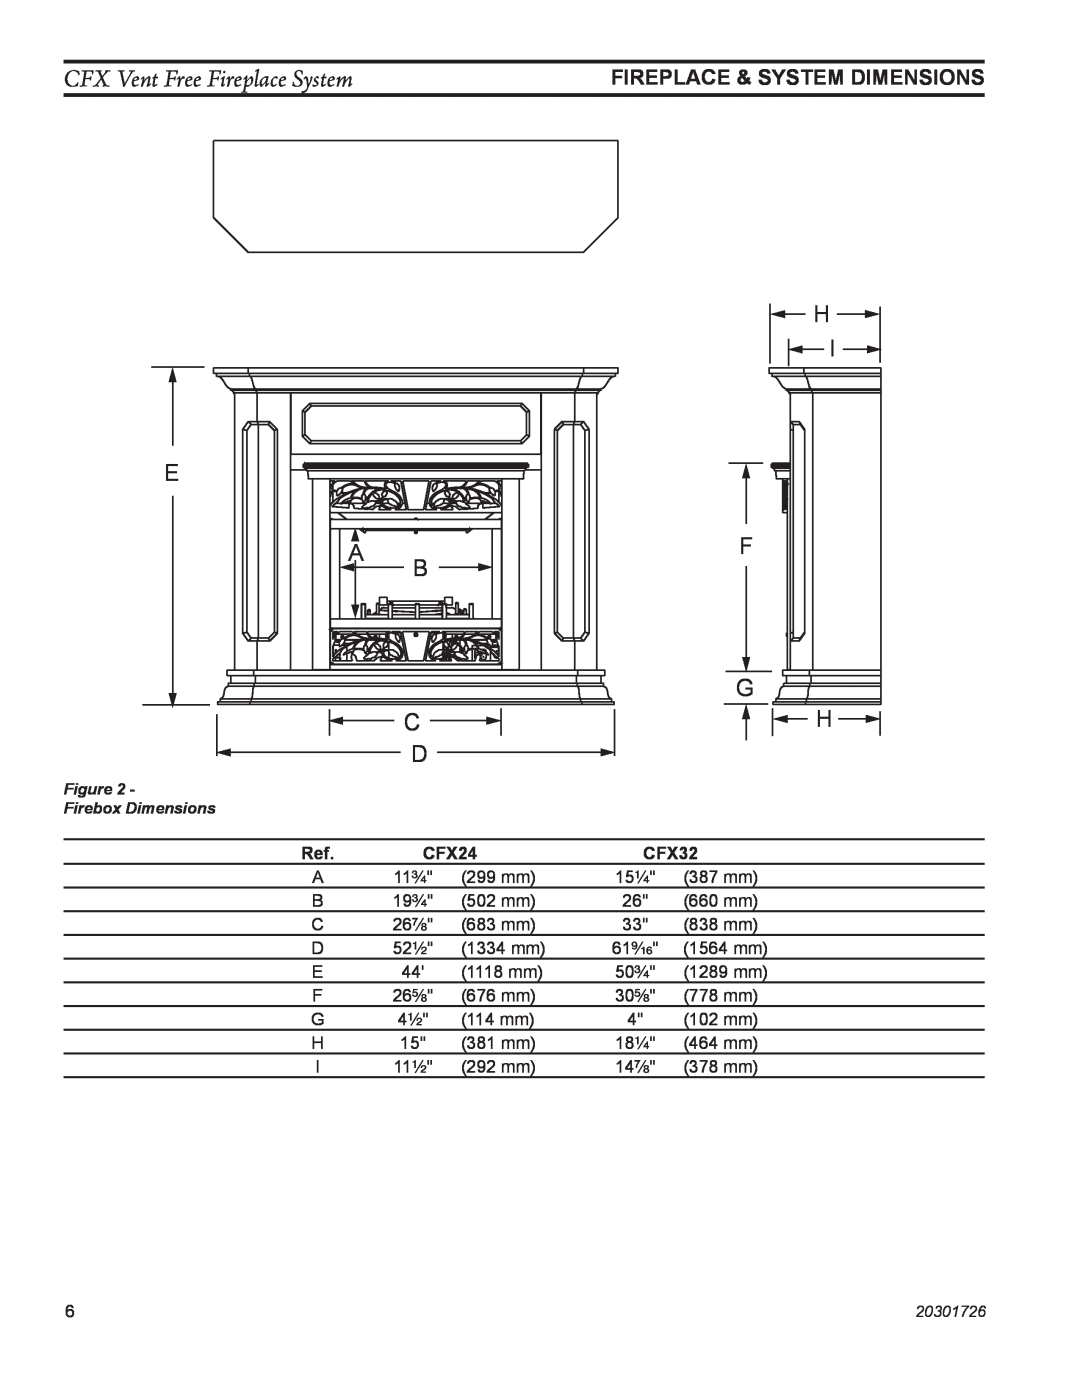 Monessen Hearth CFX24 manual CFX Vent Free Fireplace System, H I F G H, Fireplace & System Dimensions, CFX32 